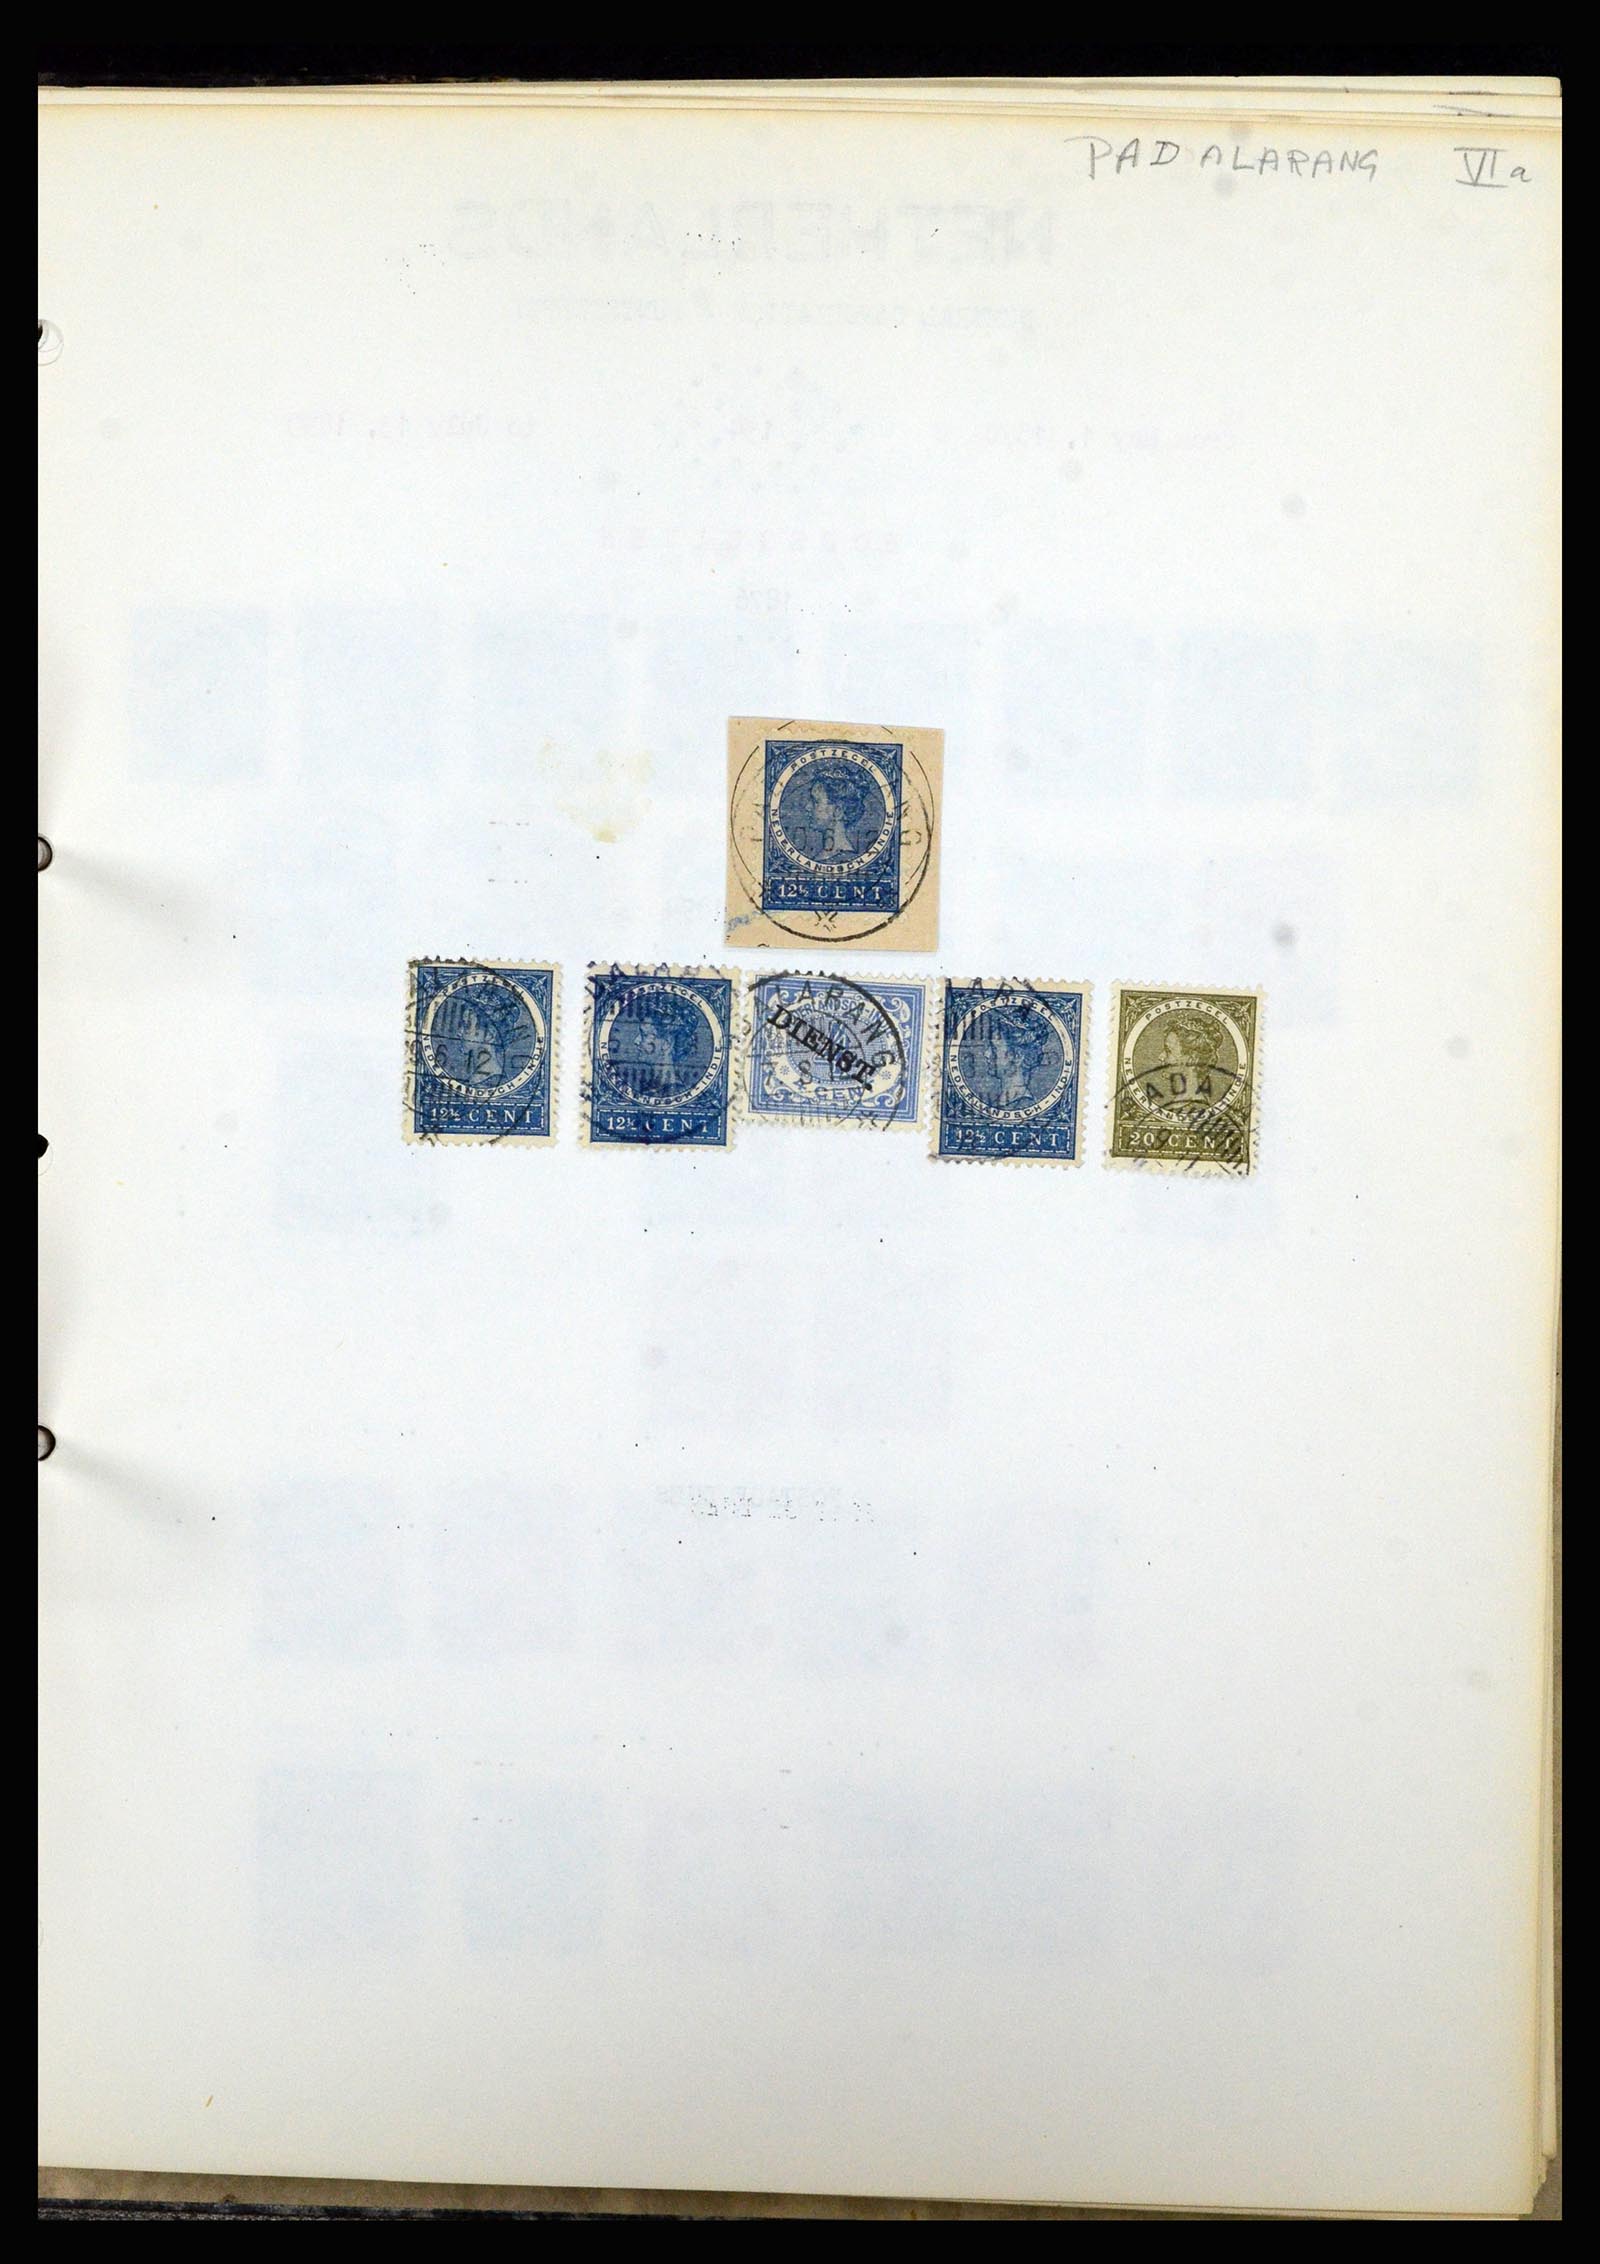 36841 077 - Stamp collection 36841 Dutch east Indies short bar cancels.